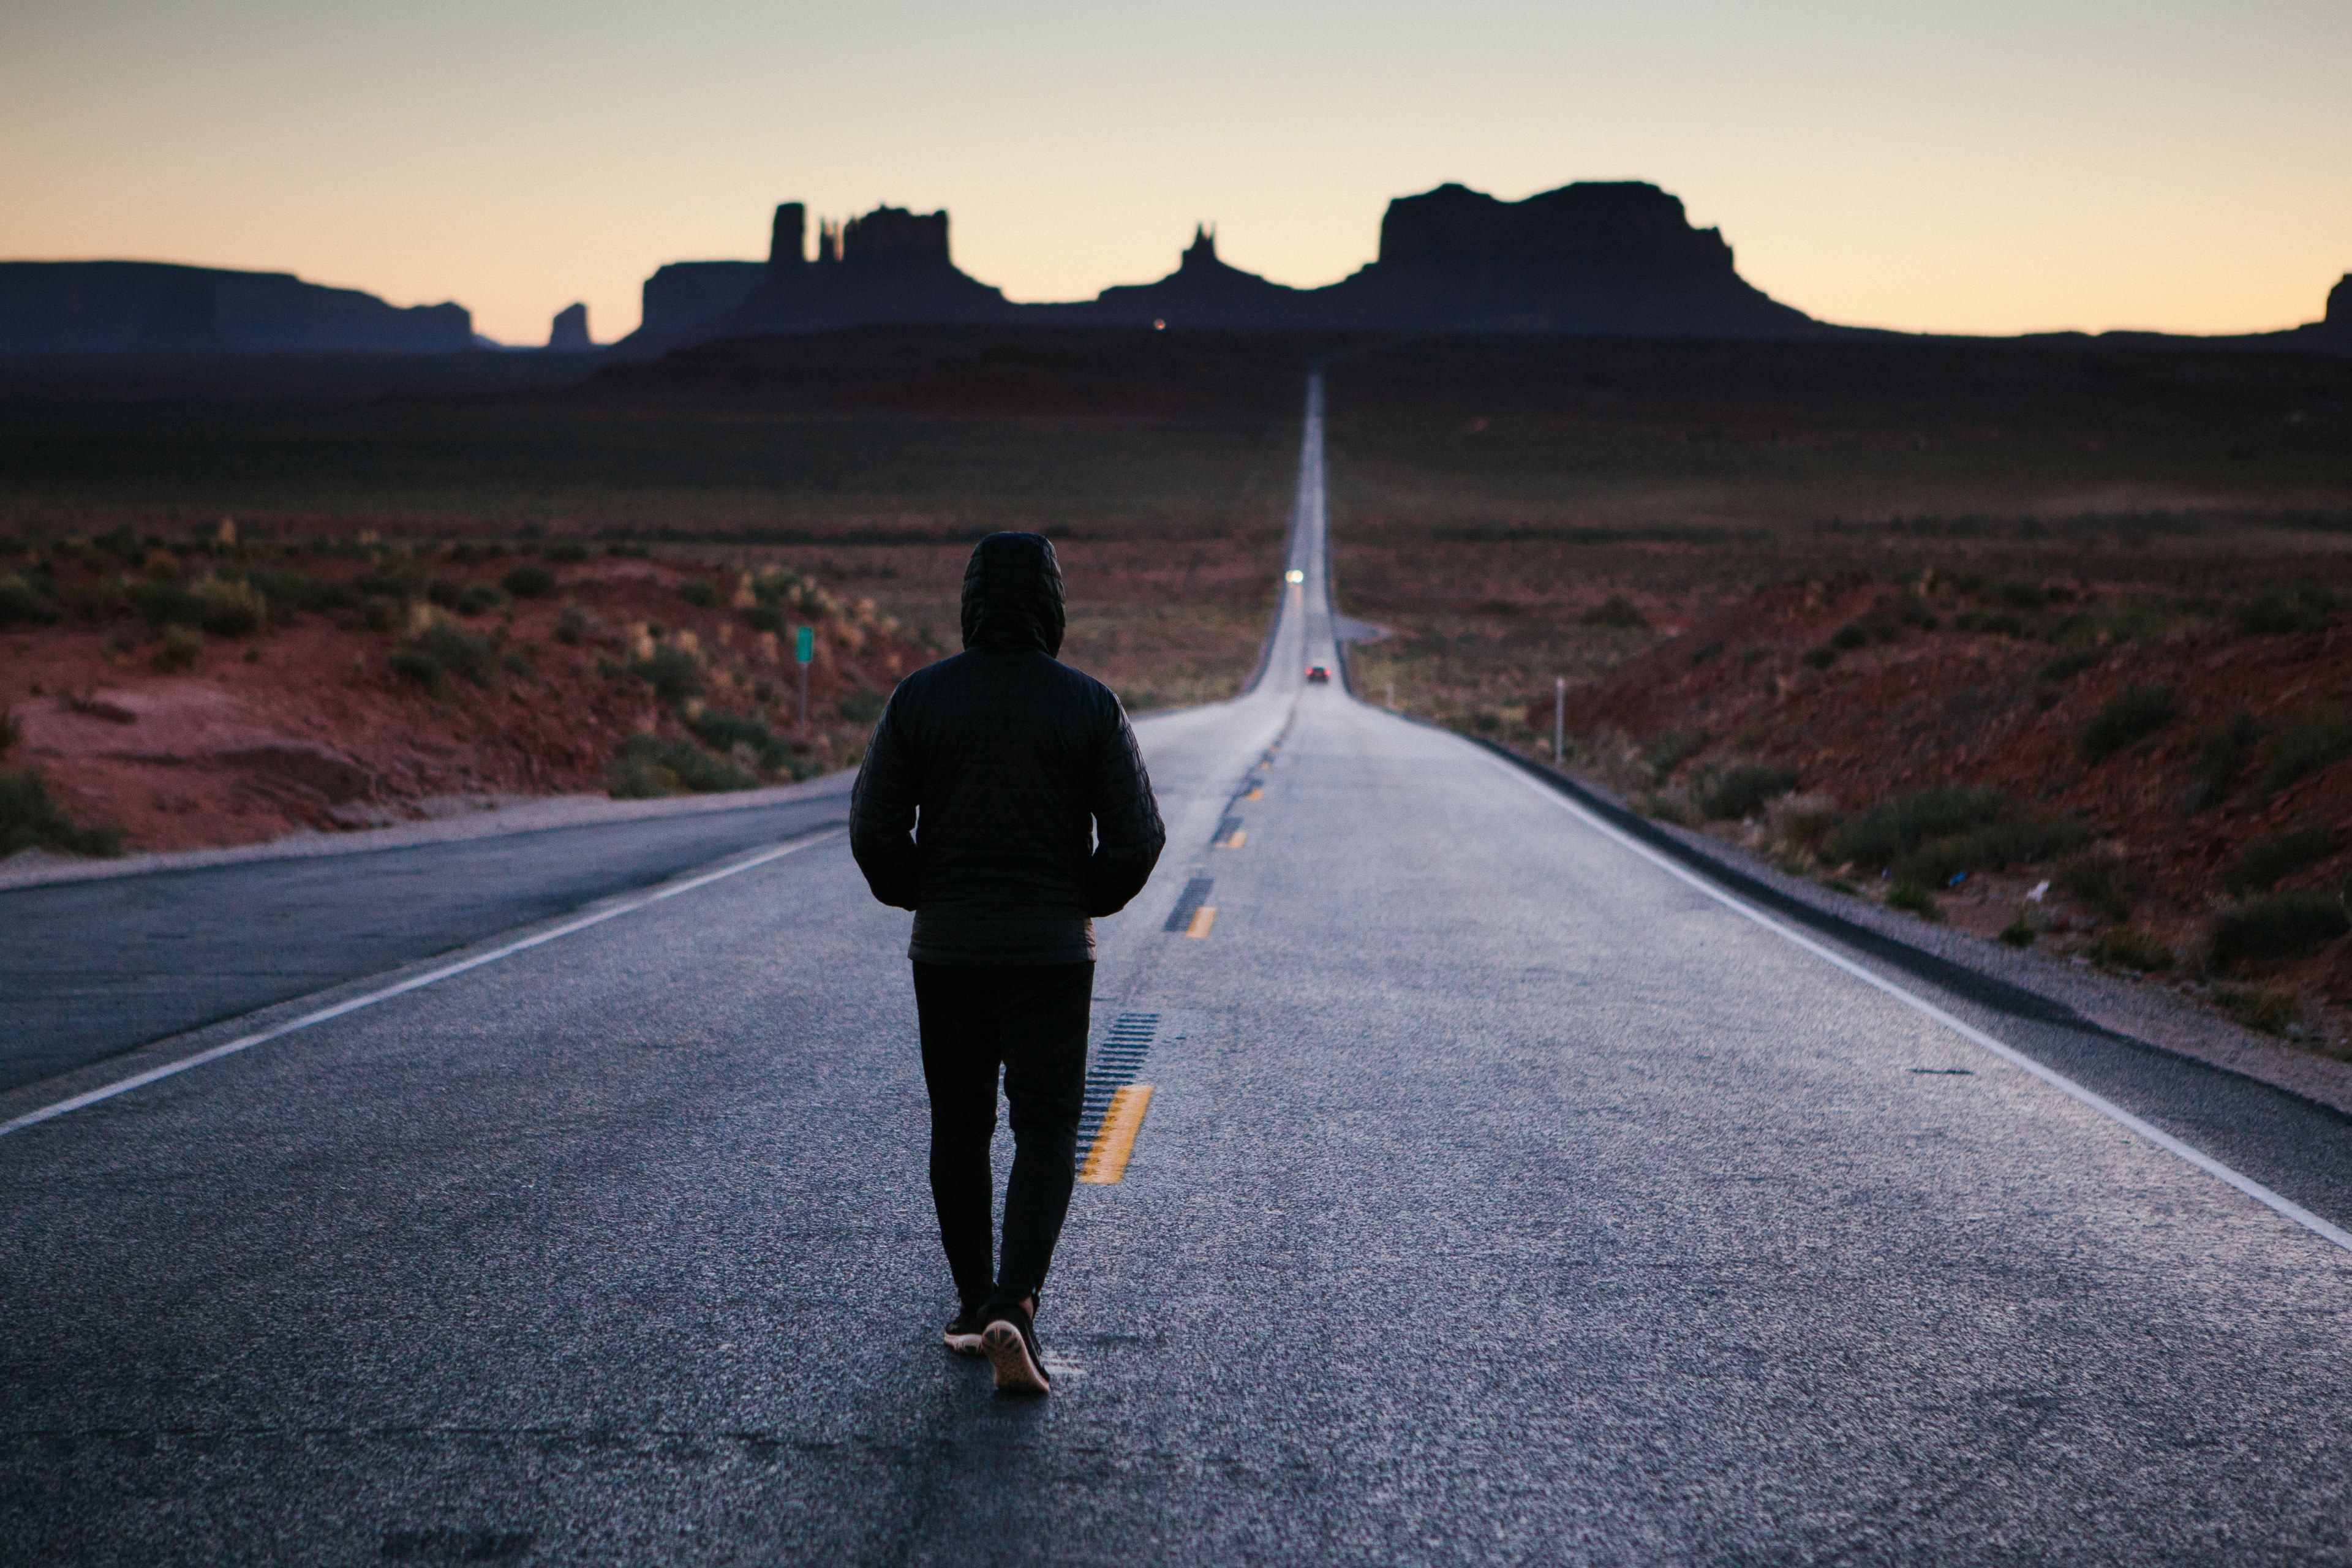 Wallpaper / anonymous person walking alone down a desert country road, sunset at monument valley 4k wallpaper